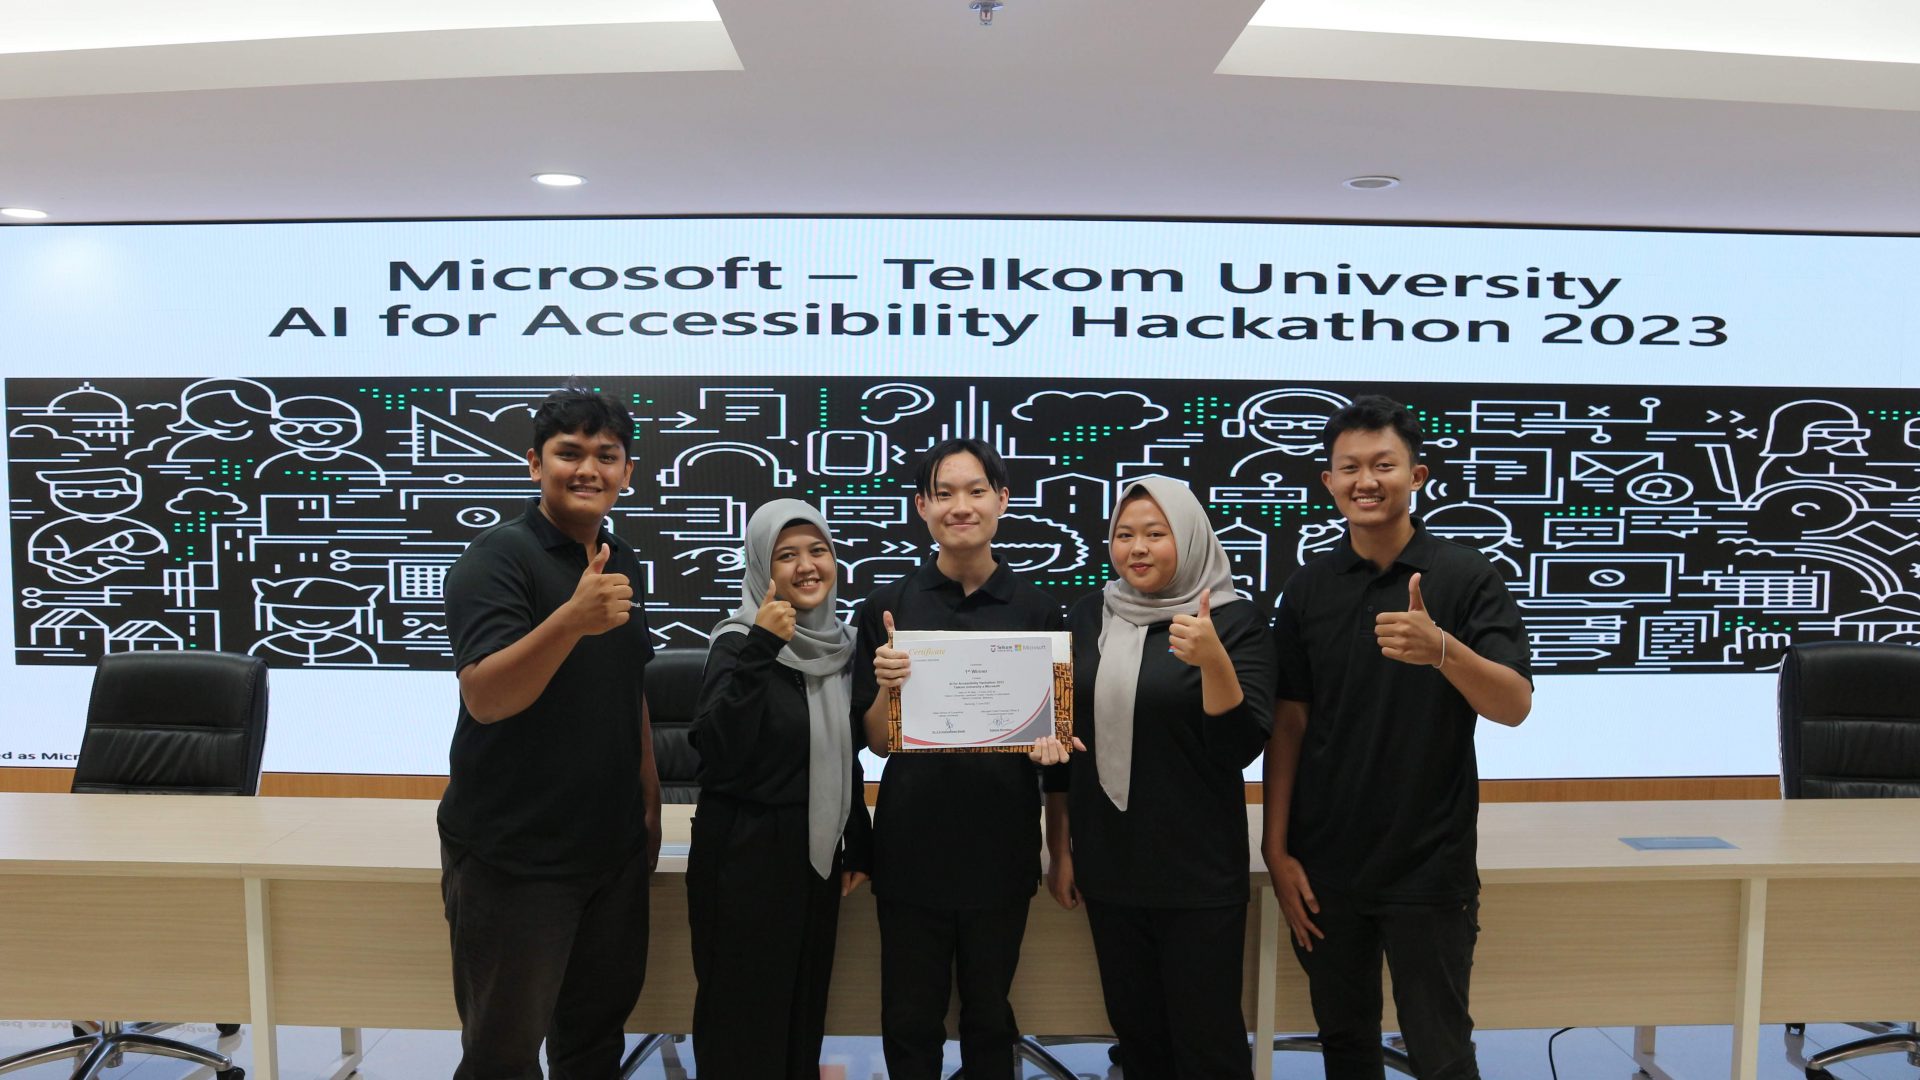 Caption: Team Prambanan from Telkom University in Indonesia at the 2023 Microsoft AI for Accessibility Hackathon